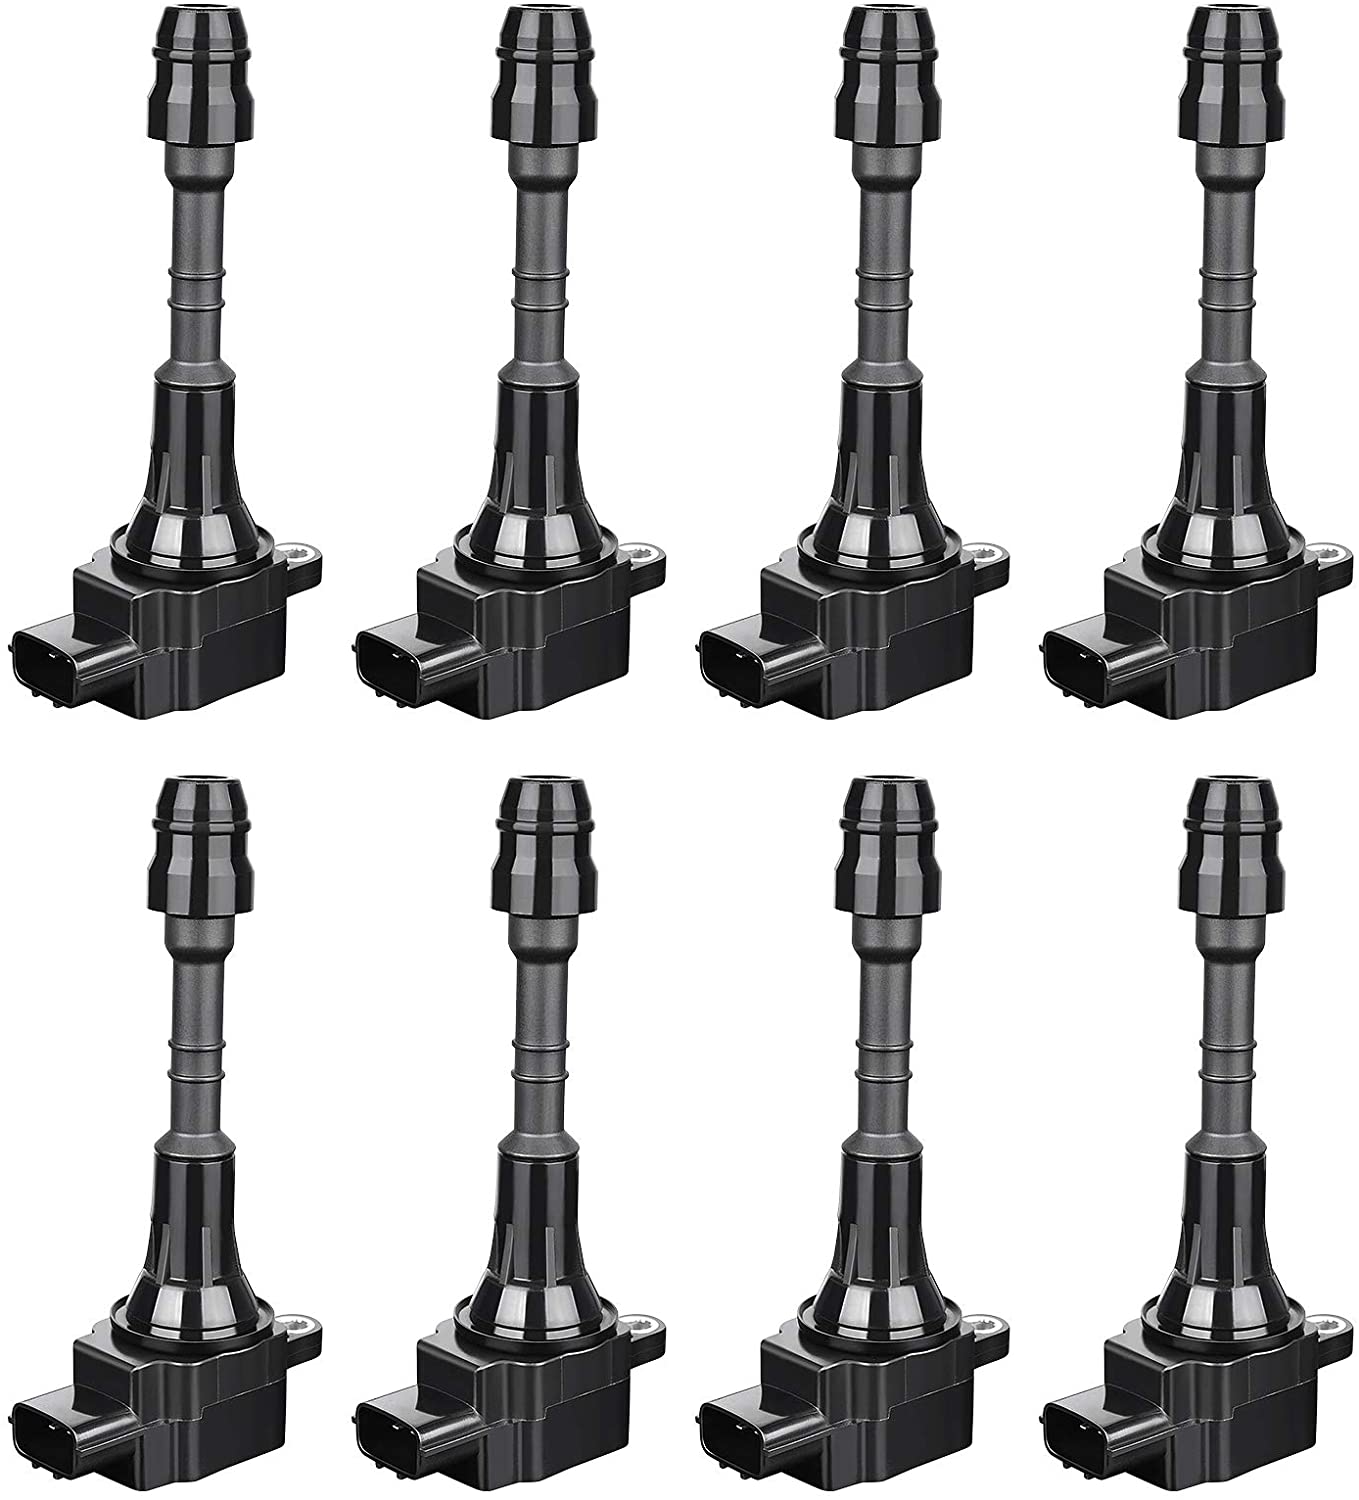 AUTOSAVER88 Ignition Coil Pack of 8 Compatible with Nissan Armada 2005-2007, Nissan Titan 2003-2007, Nissan Pathfinder Armada 2004, Infiniti QX56 2004-2007 5.6L V8